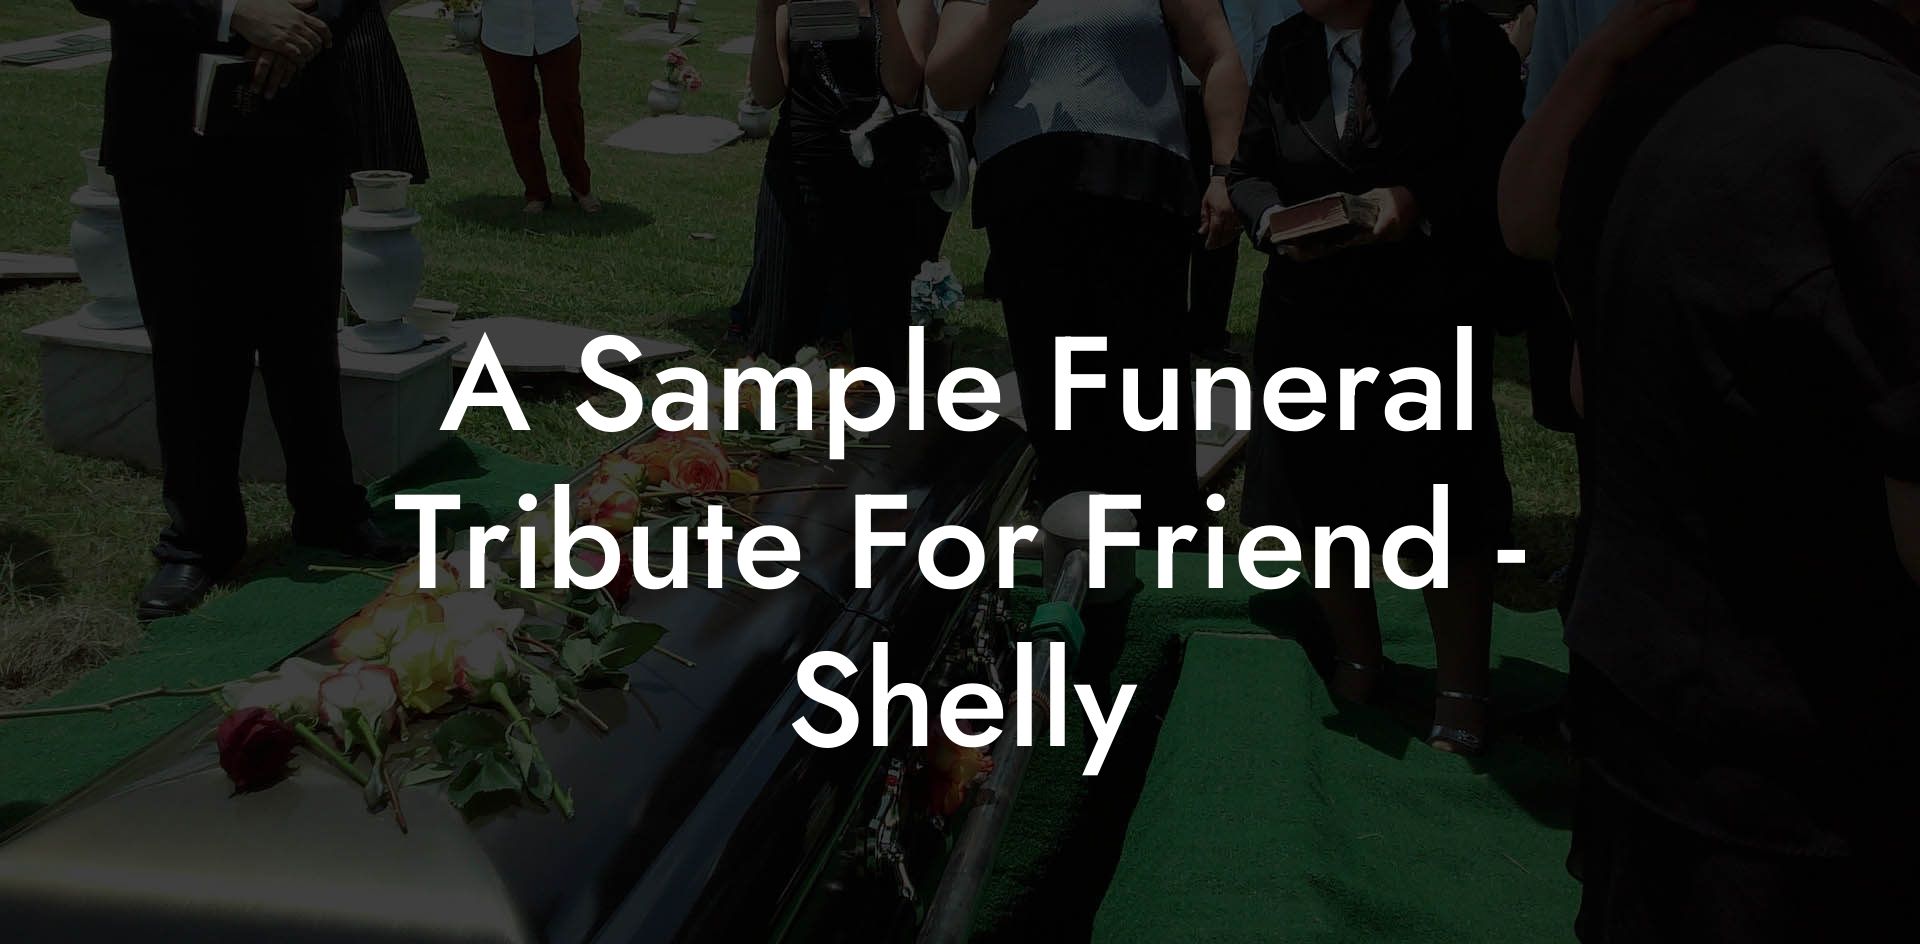 A Sample Funeral Tribute For Friend - Shelly